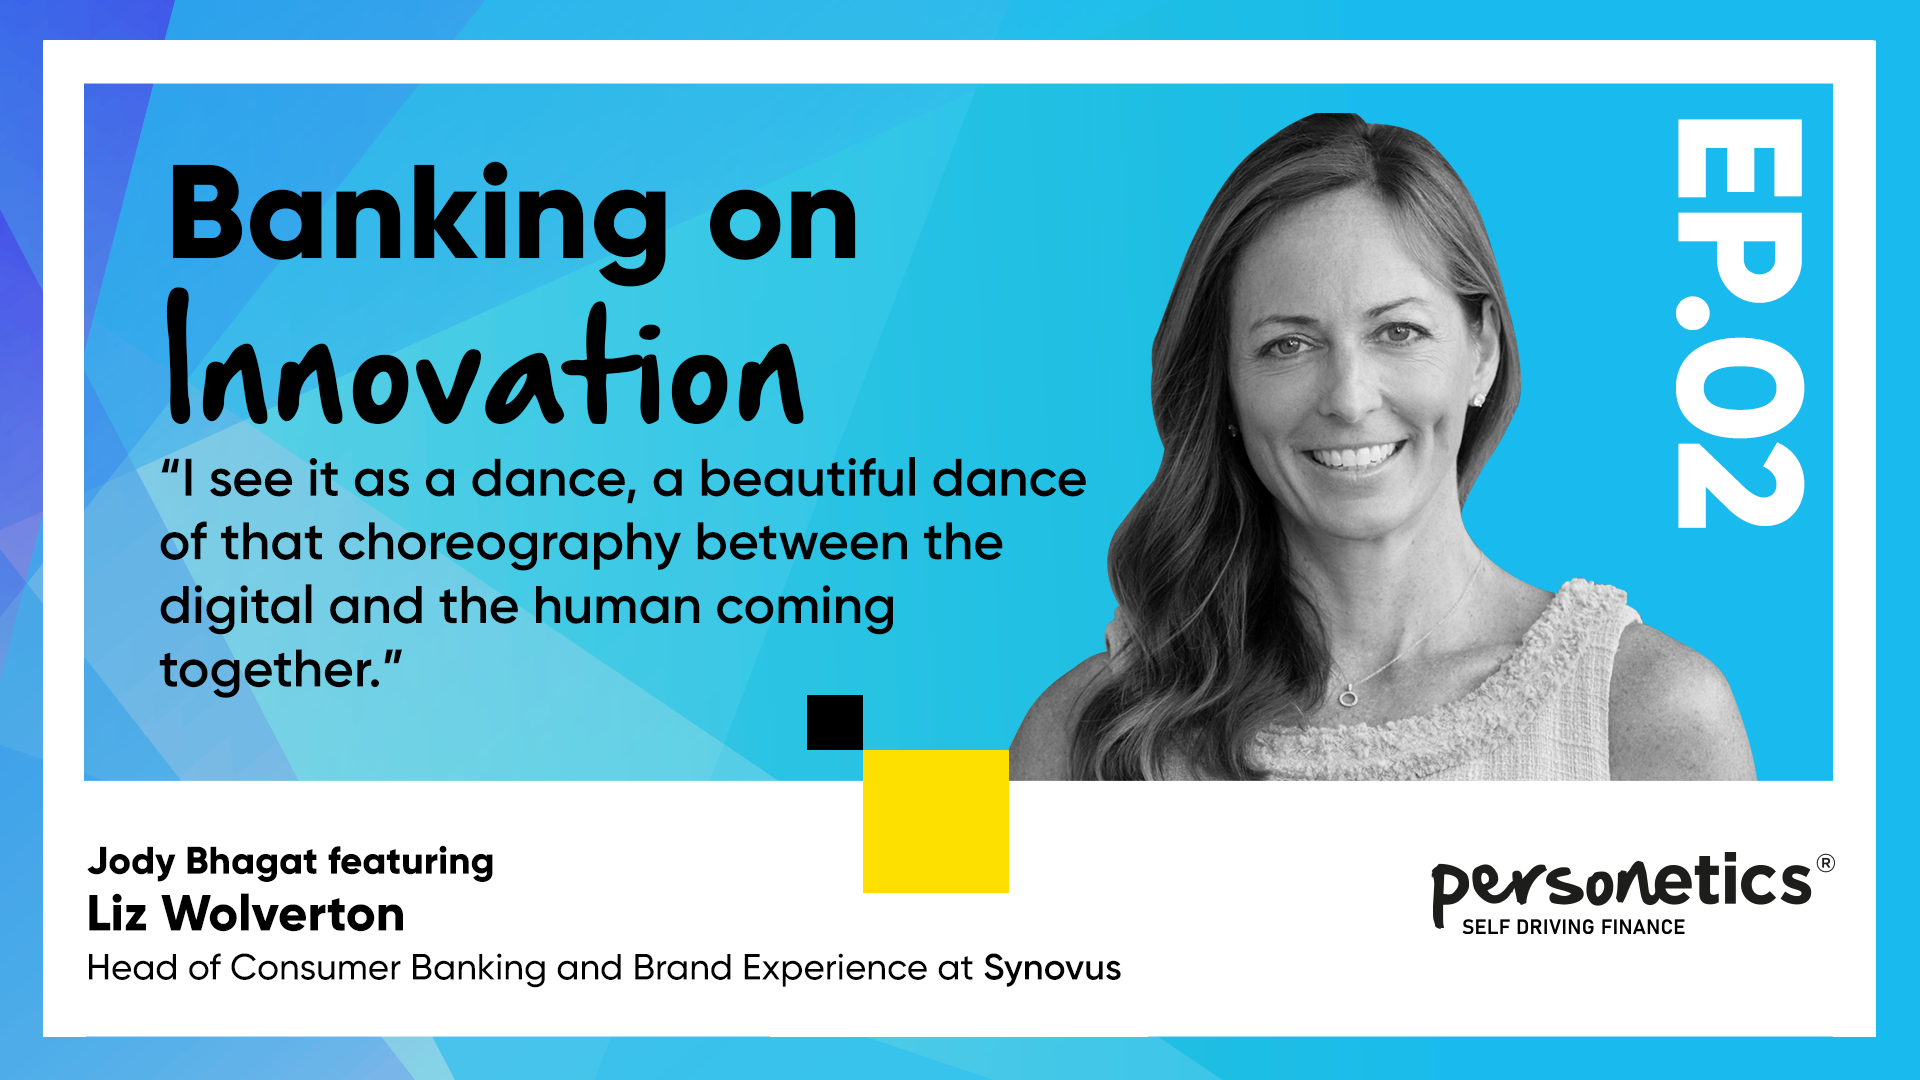 Liz Wolverton, Head of Consumer Banking and Brand Experience at Synovus